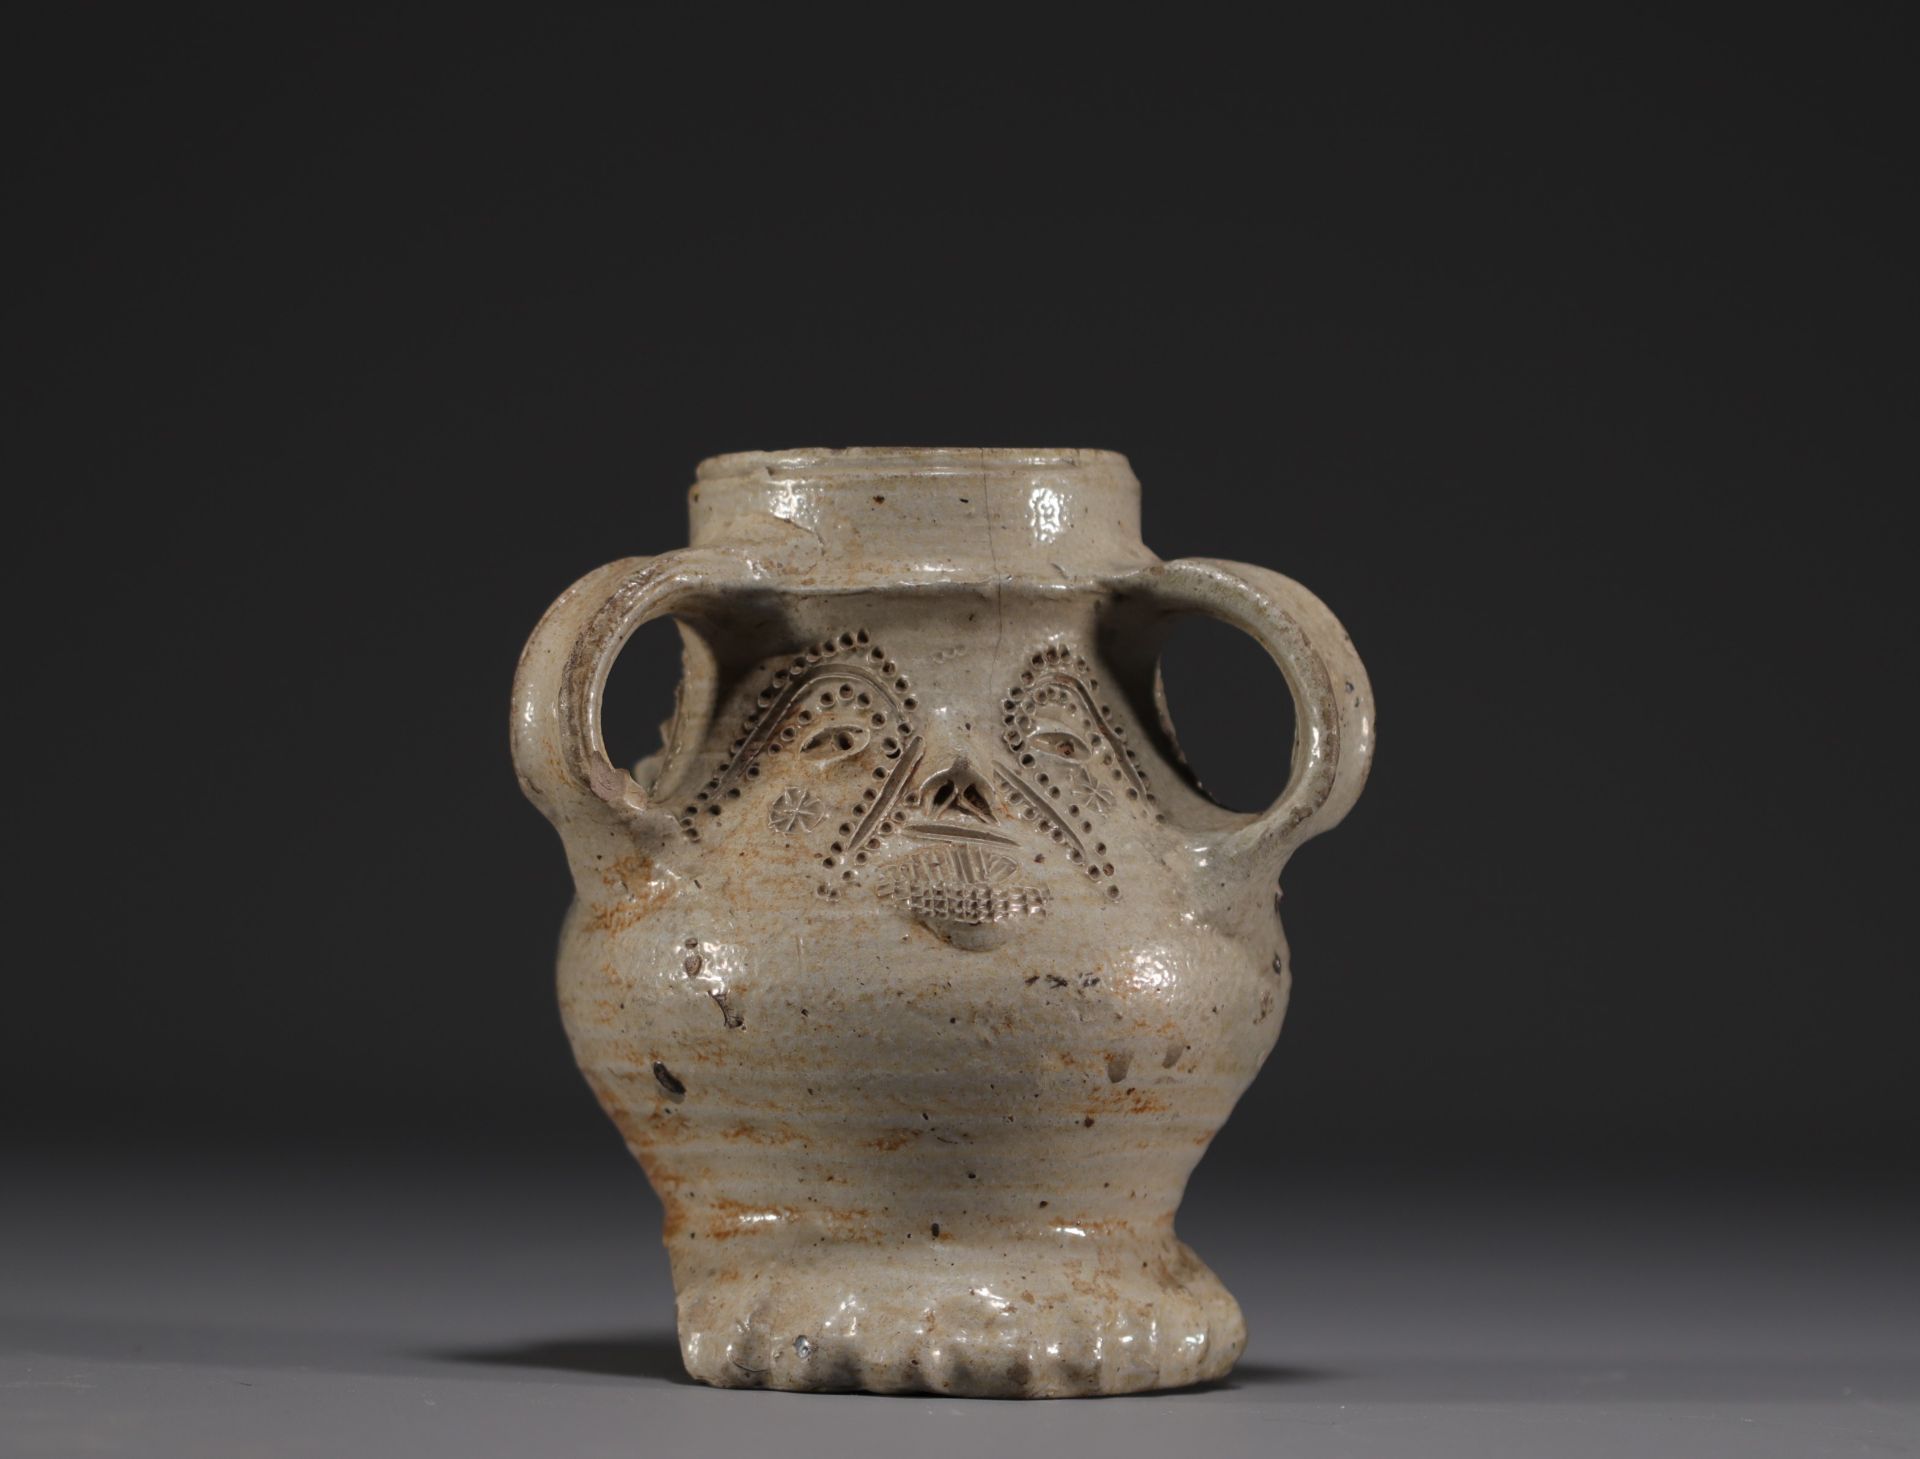 Raeren - Rare stoneware jug decorated with faces, salt glaze, early 16th century. - Image 3 of 5